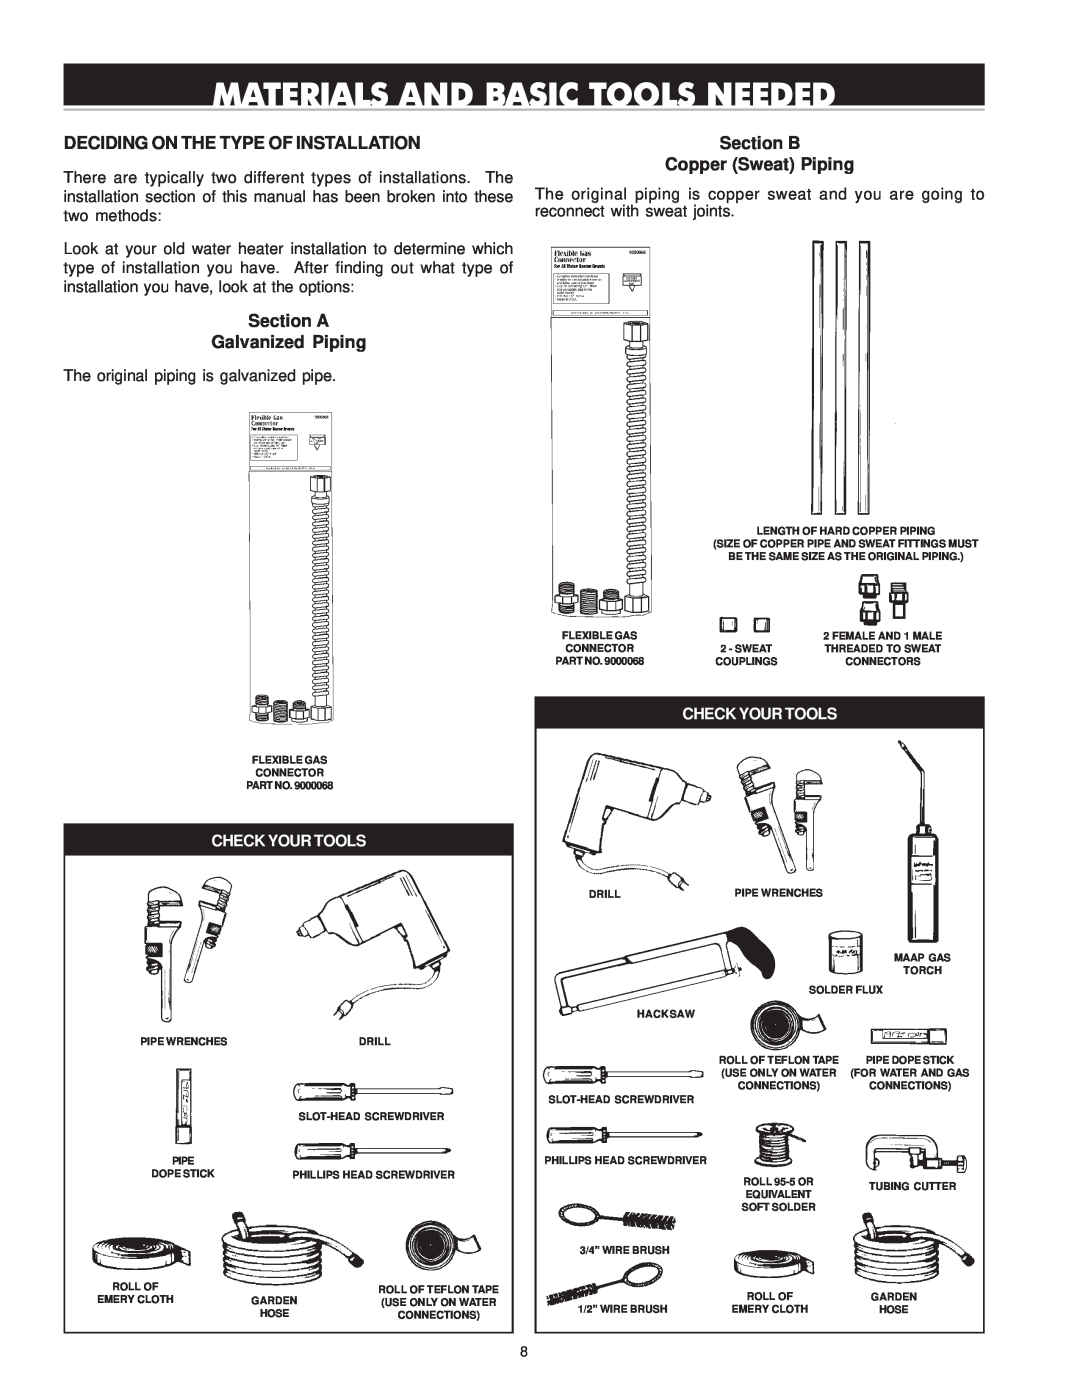 Reliance Water Heaters 196296-001 Materials And Basic Tools Needed, Deciding On The Type Of Installation, Check Your Tools 